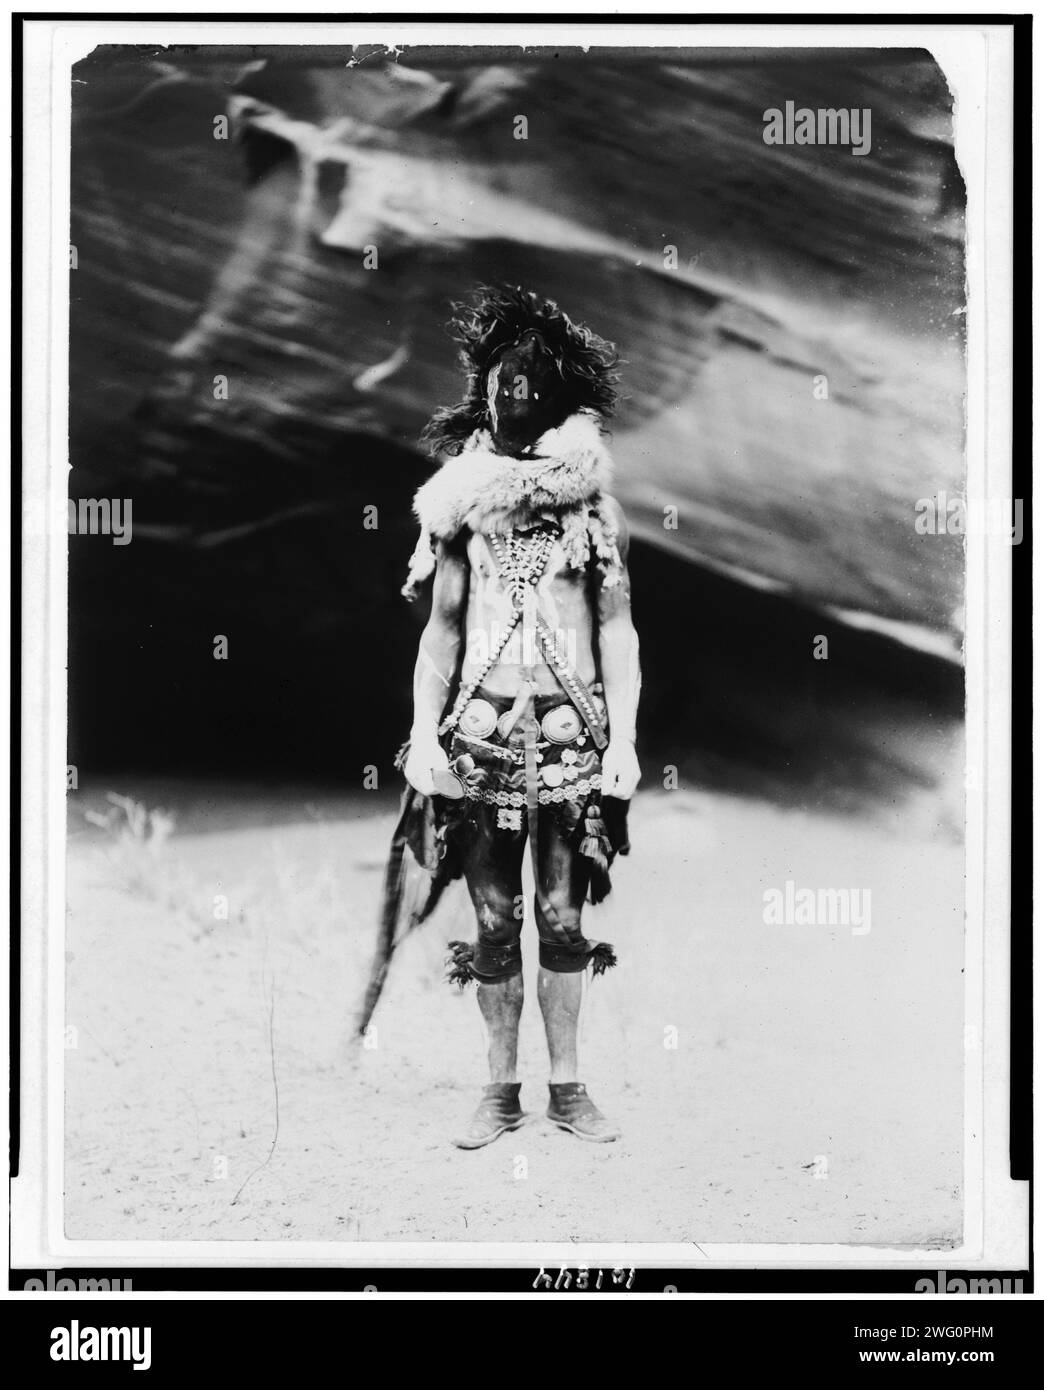 Nayenezgani-Navaho, 1904, c1905. Indian, full-length portrait, standing, facing front, wearing dark leather mask, fur ruff, cloth girdle, silver concho belt and necklaces. Stock Photo